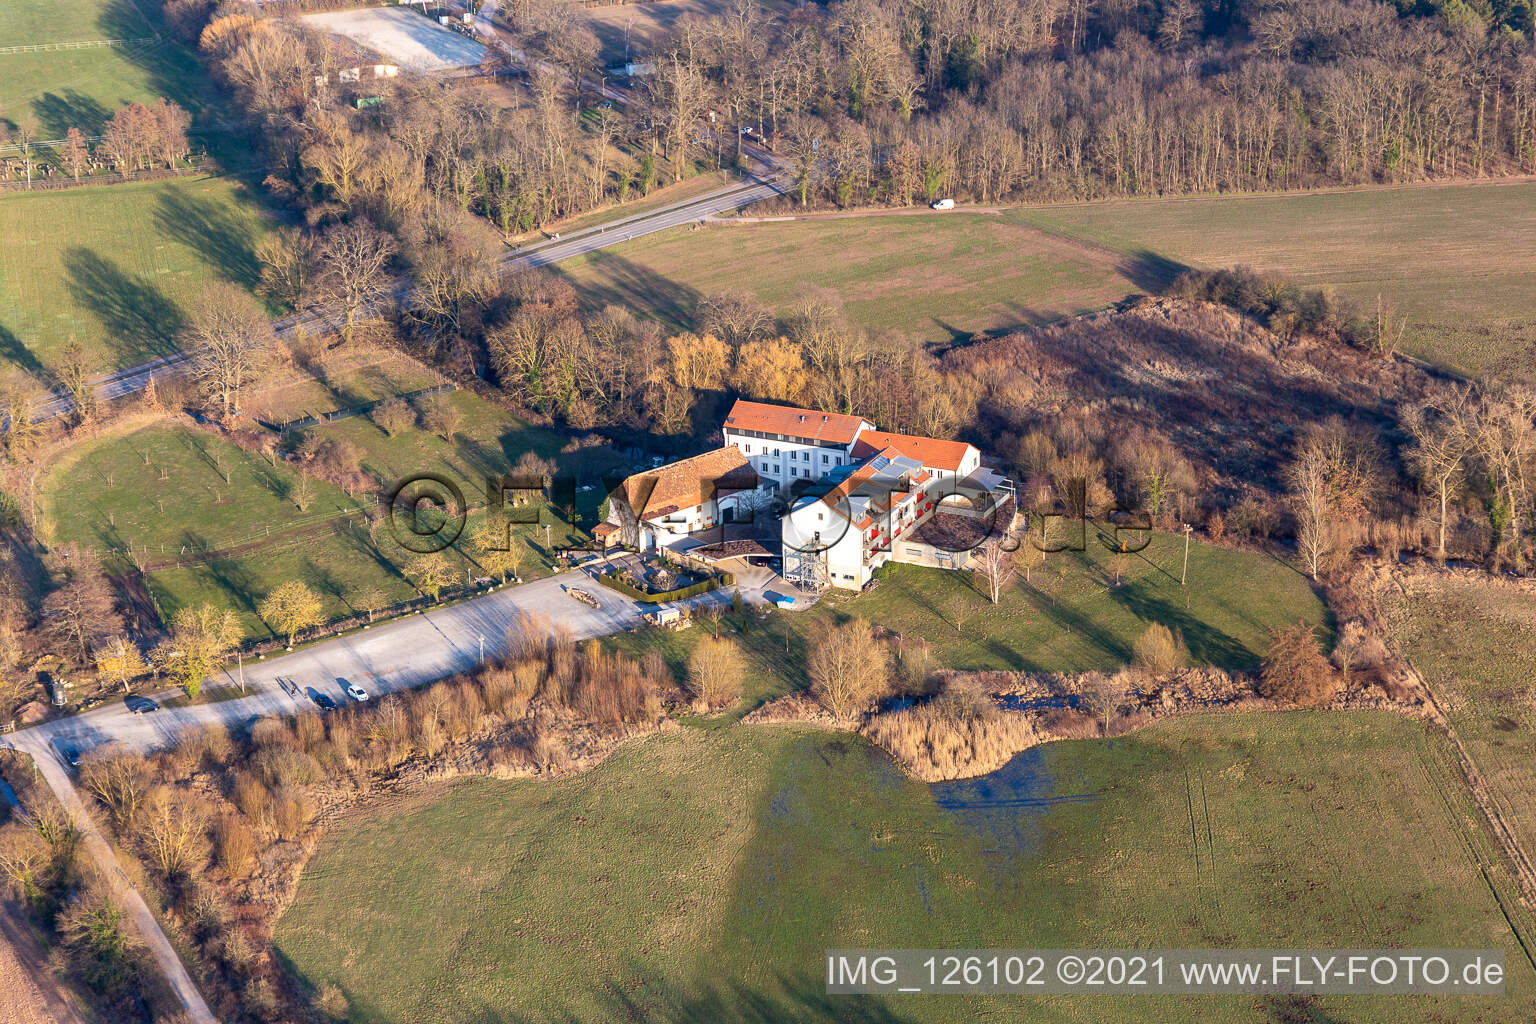 Complex of the hotel building Zeiskamer Muehle in Zeiskam in the state Rhineland-Palatinate, Germany from above